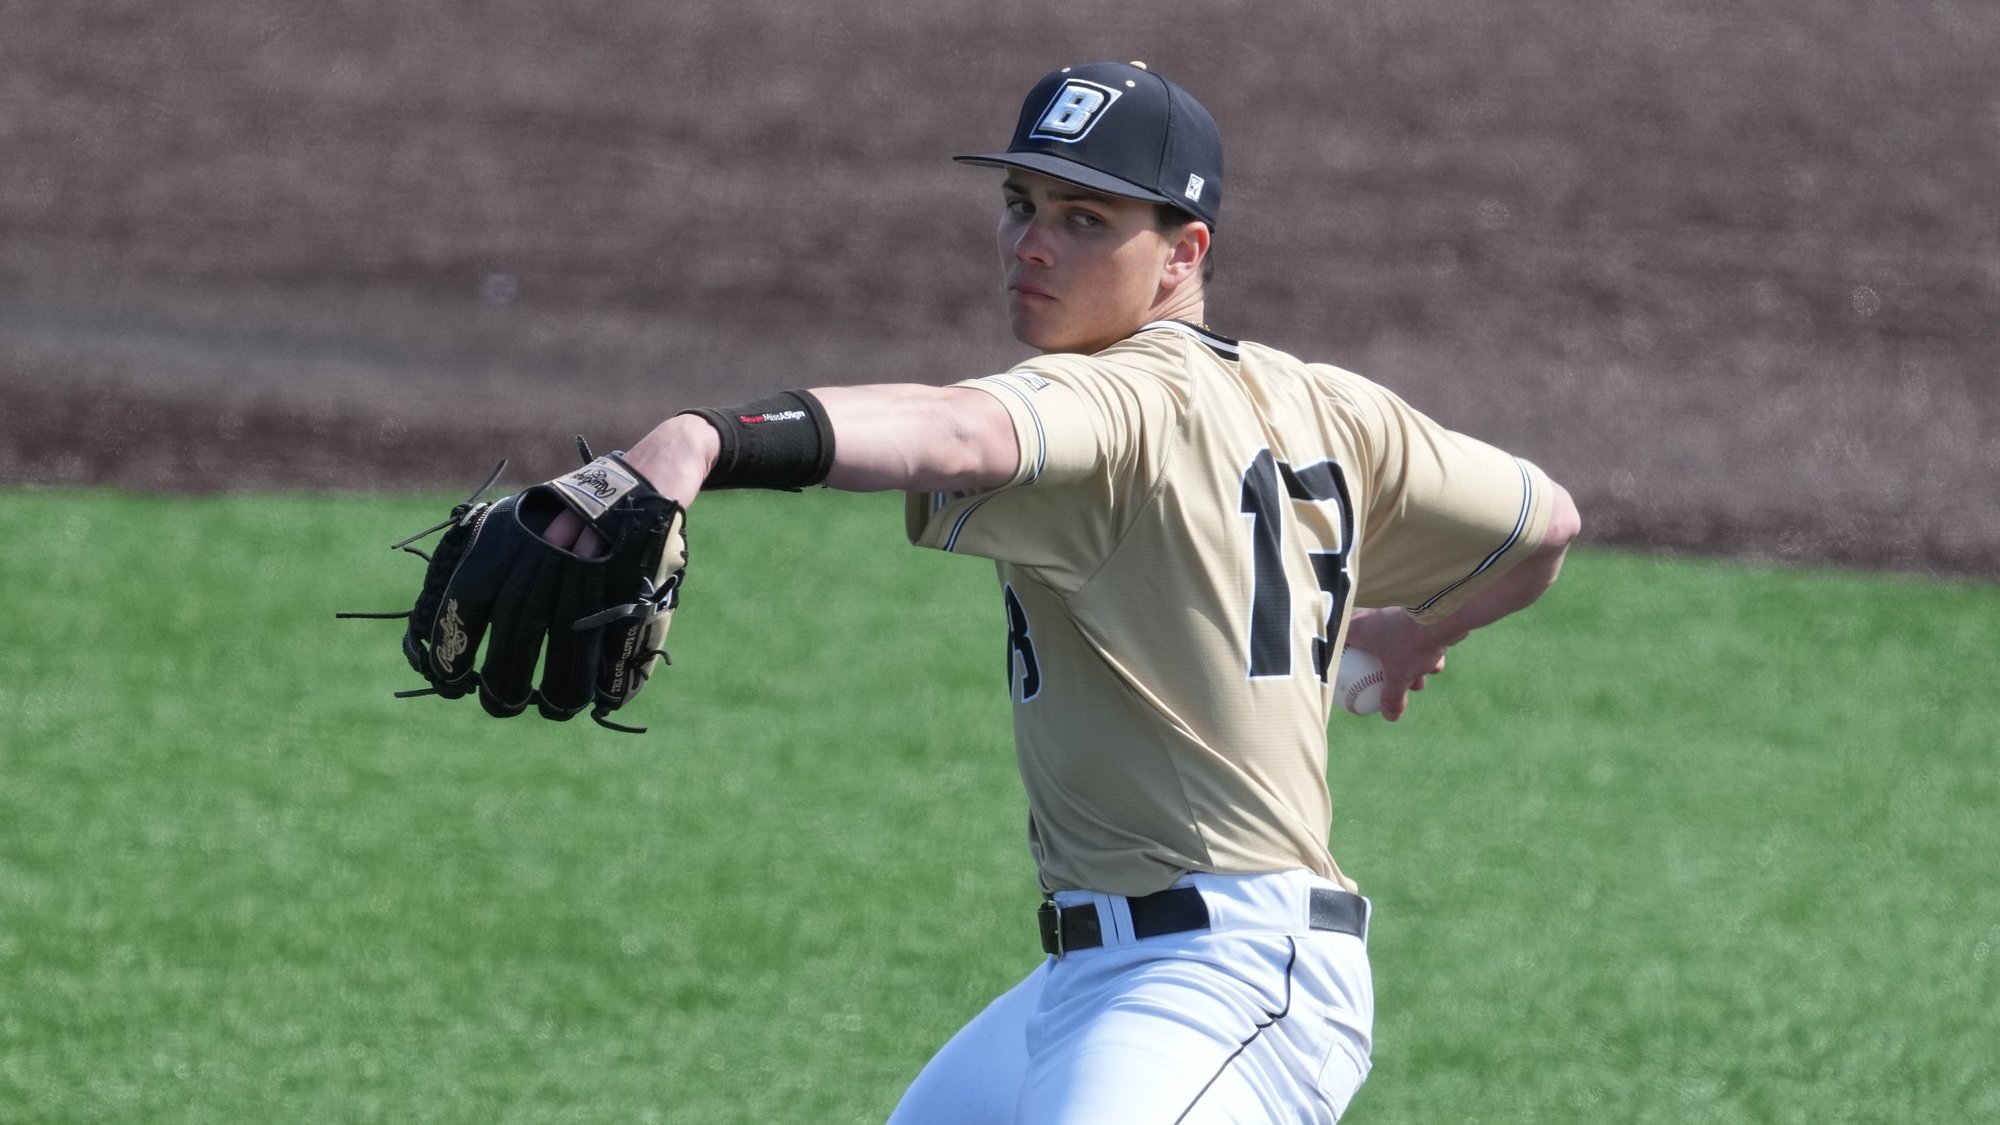 Wichrowski leads Bryant past UAlbany in game one Saturday